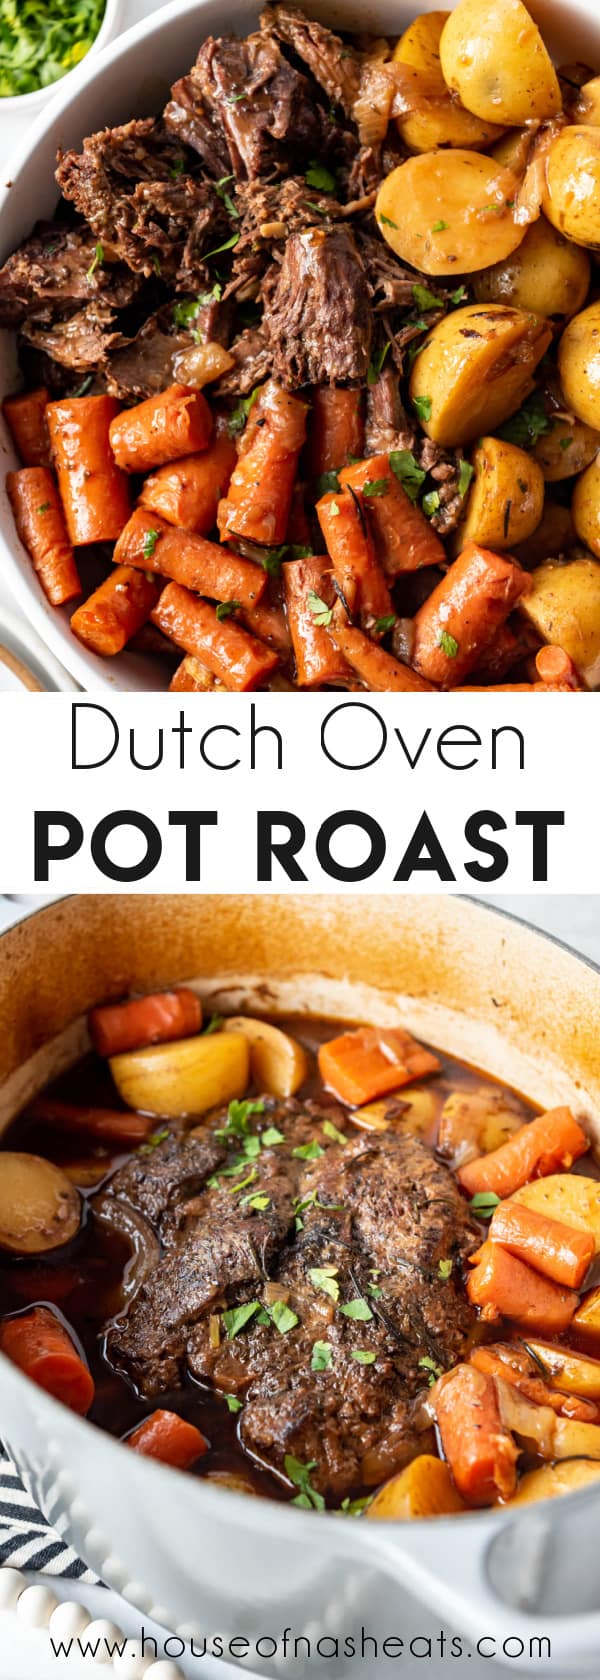 A collage of images of pot roast with text overlay.